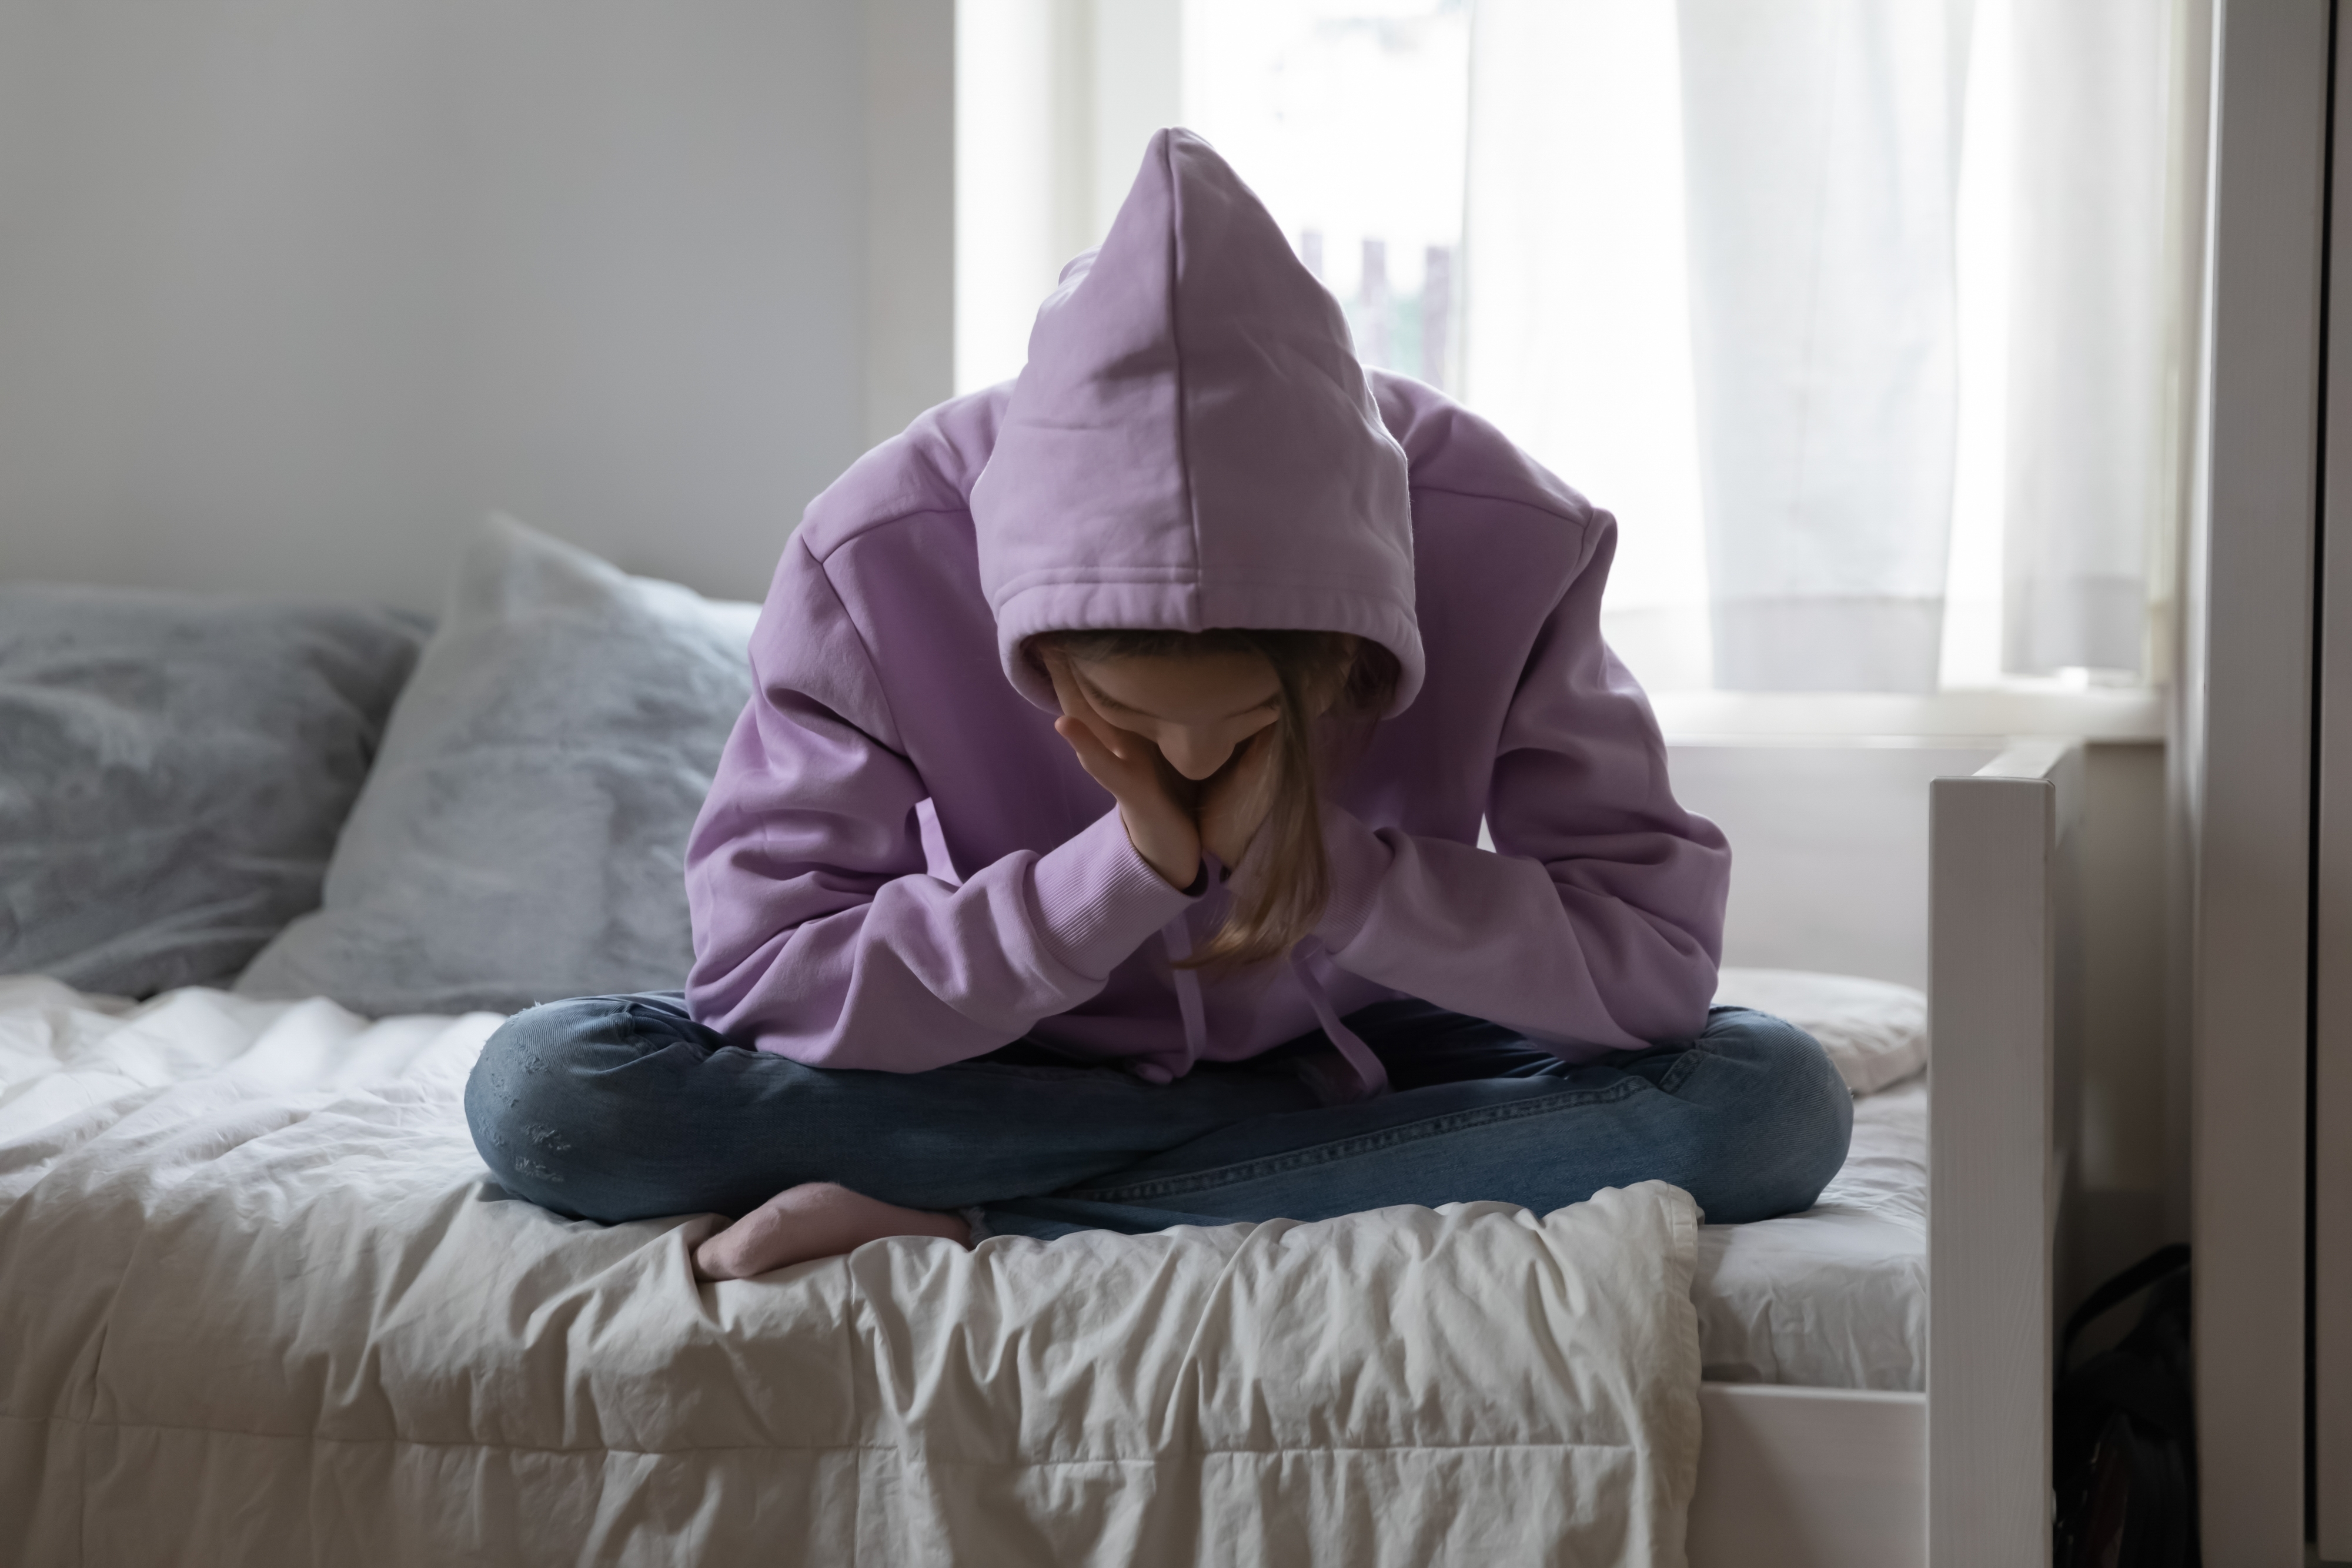 An young girl in a hoodie sitting on a bed  Source: Shutterstock